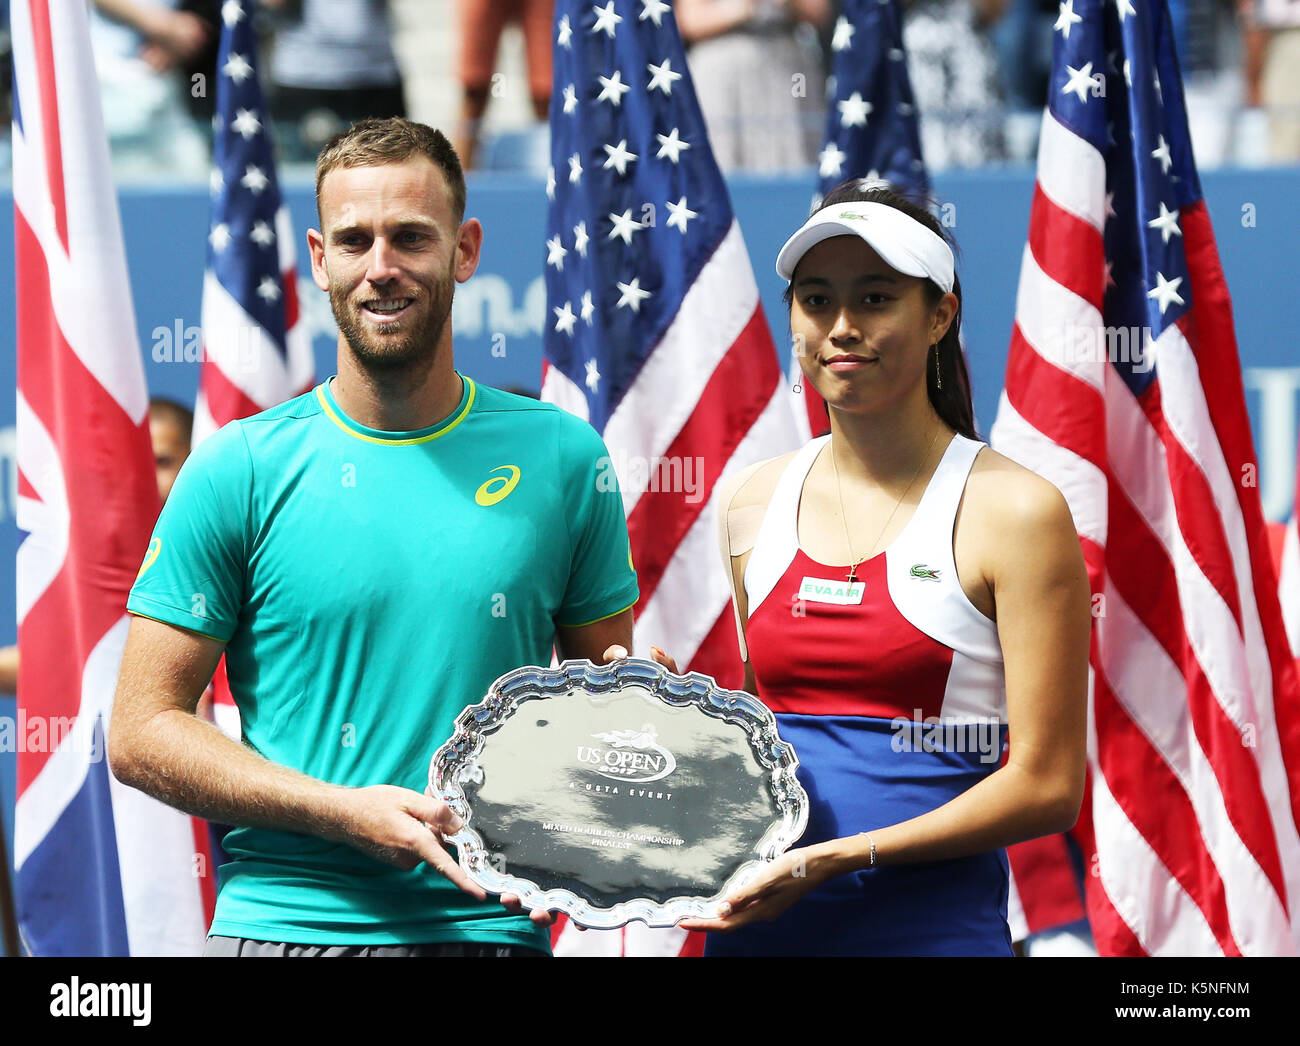 New York, USA. 9th Sep, 2017. Hao-Ching Chan (R) of Chinese Taipei and Michael Venus of New Zealand attend the awarding ceremony after their mixed doubles final match against Martina Hingis of Switzerland and Jamie Murray of Great Britain at the 2017 US Open in New York, the United States, Sept. 9, 2017. Martina Hingis and Jamie Murray won 2-1 to claim the title. Credit: Qin Lang/Xinhua/Alamy Live News Stock Photo